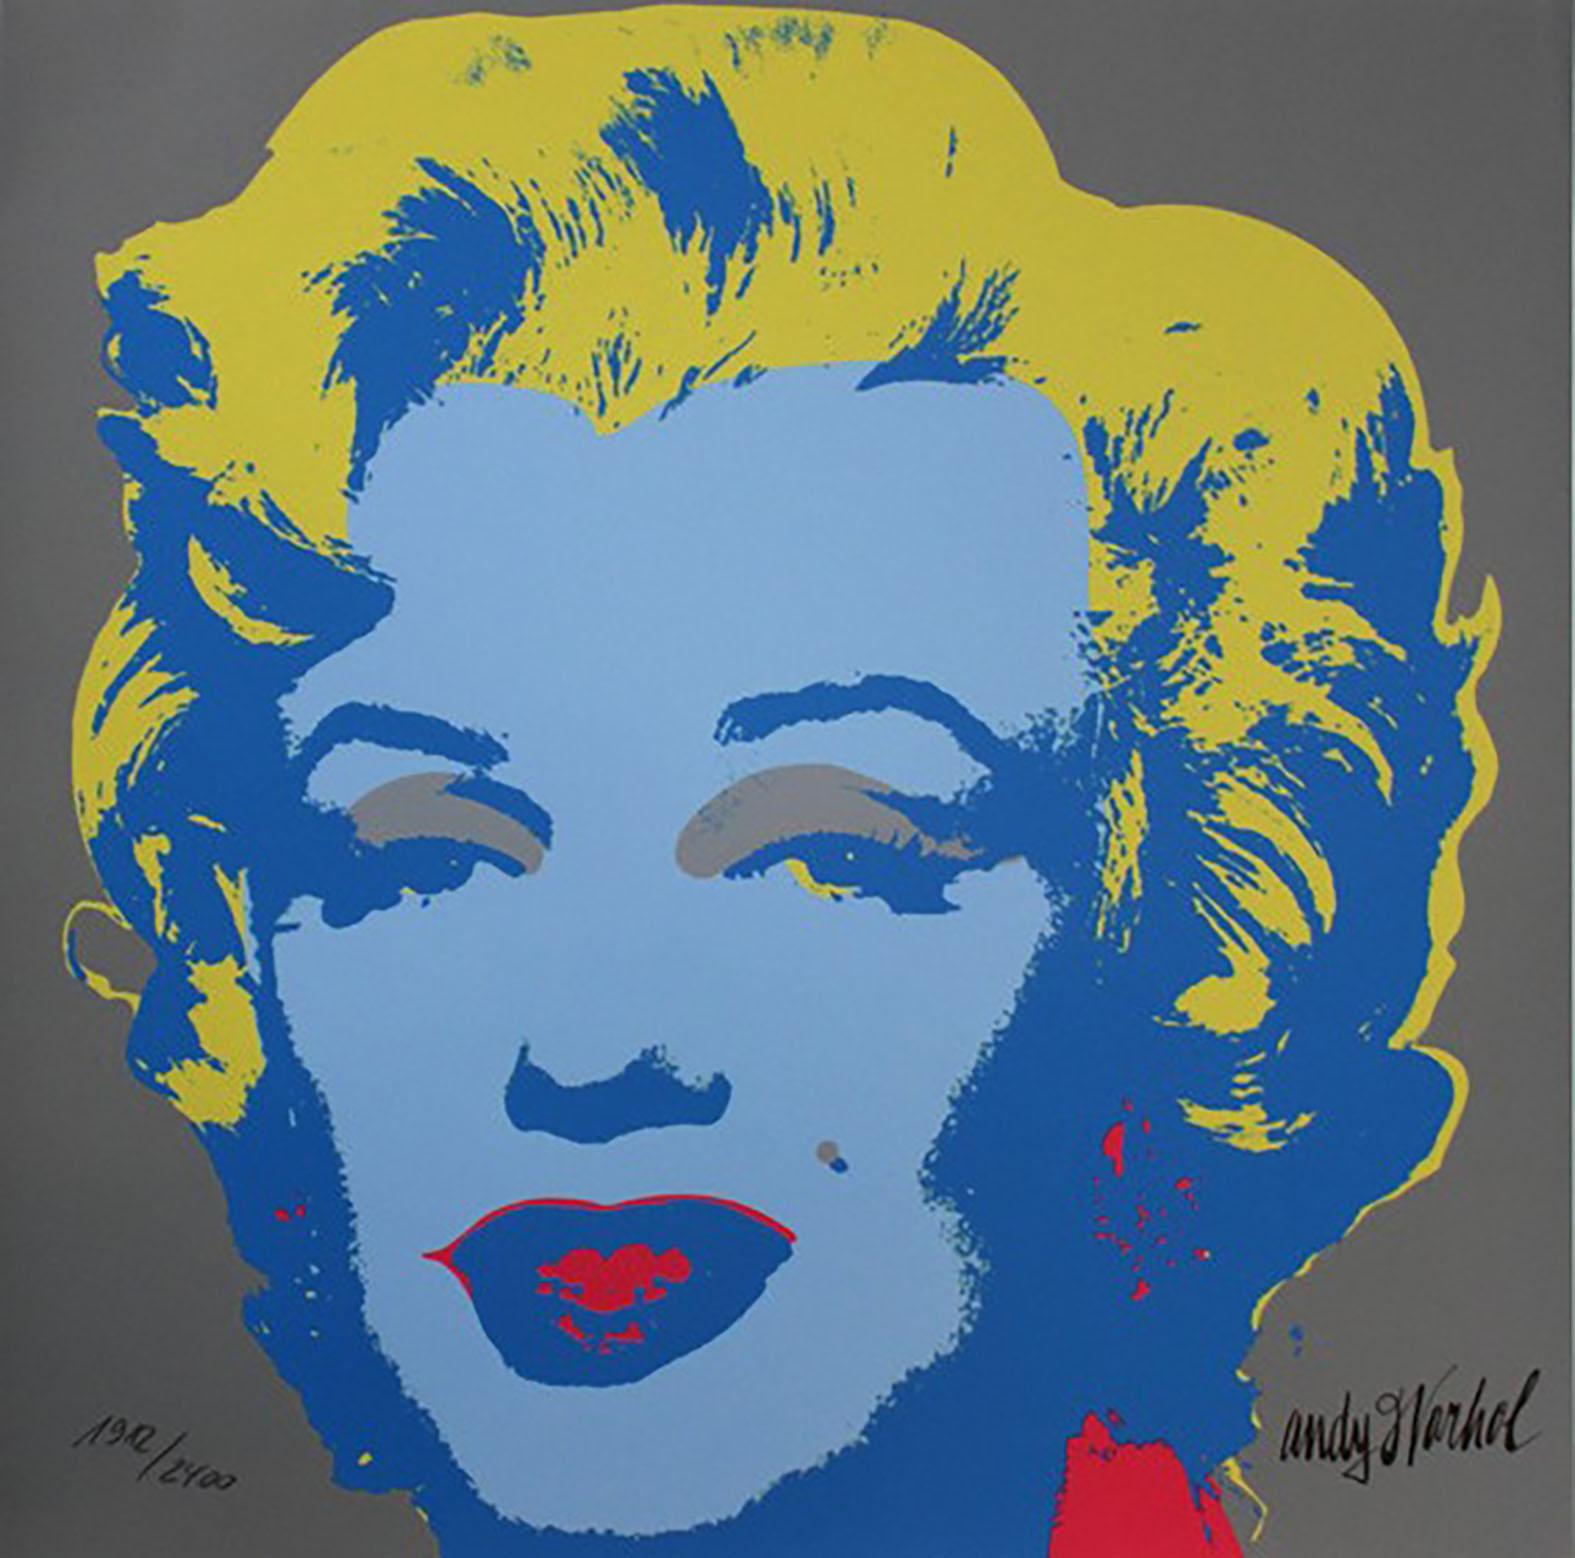 Andy Warhol
MARILYN MONROE - 1967 -  baby blue
 60 cm x 60 cm
edited by the Museum of Art, Carnegie Institute Pittsburgh, 1986 (CMOA)
2400 copies. numbered by hand
signature in the board
CMOA stamp on back
290 euros